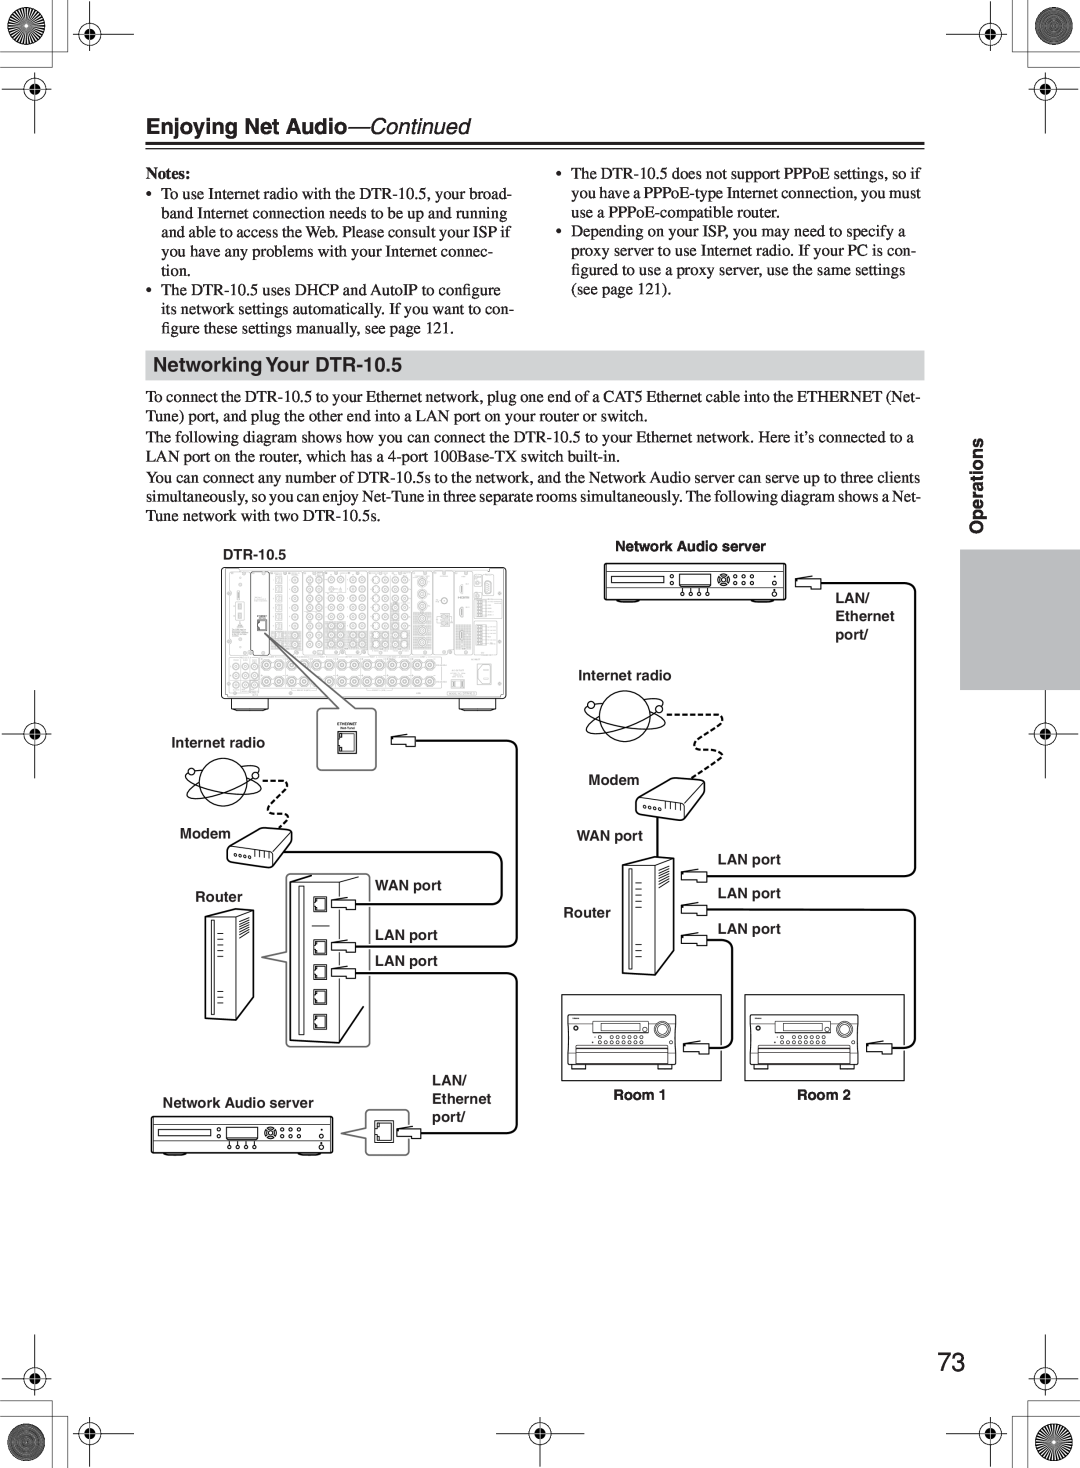 Integra instruction manual Enjoying Net Audio—Continued, Networking Your DTR-10.5, Operations, Notes 